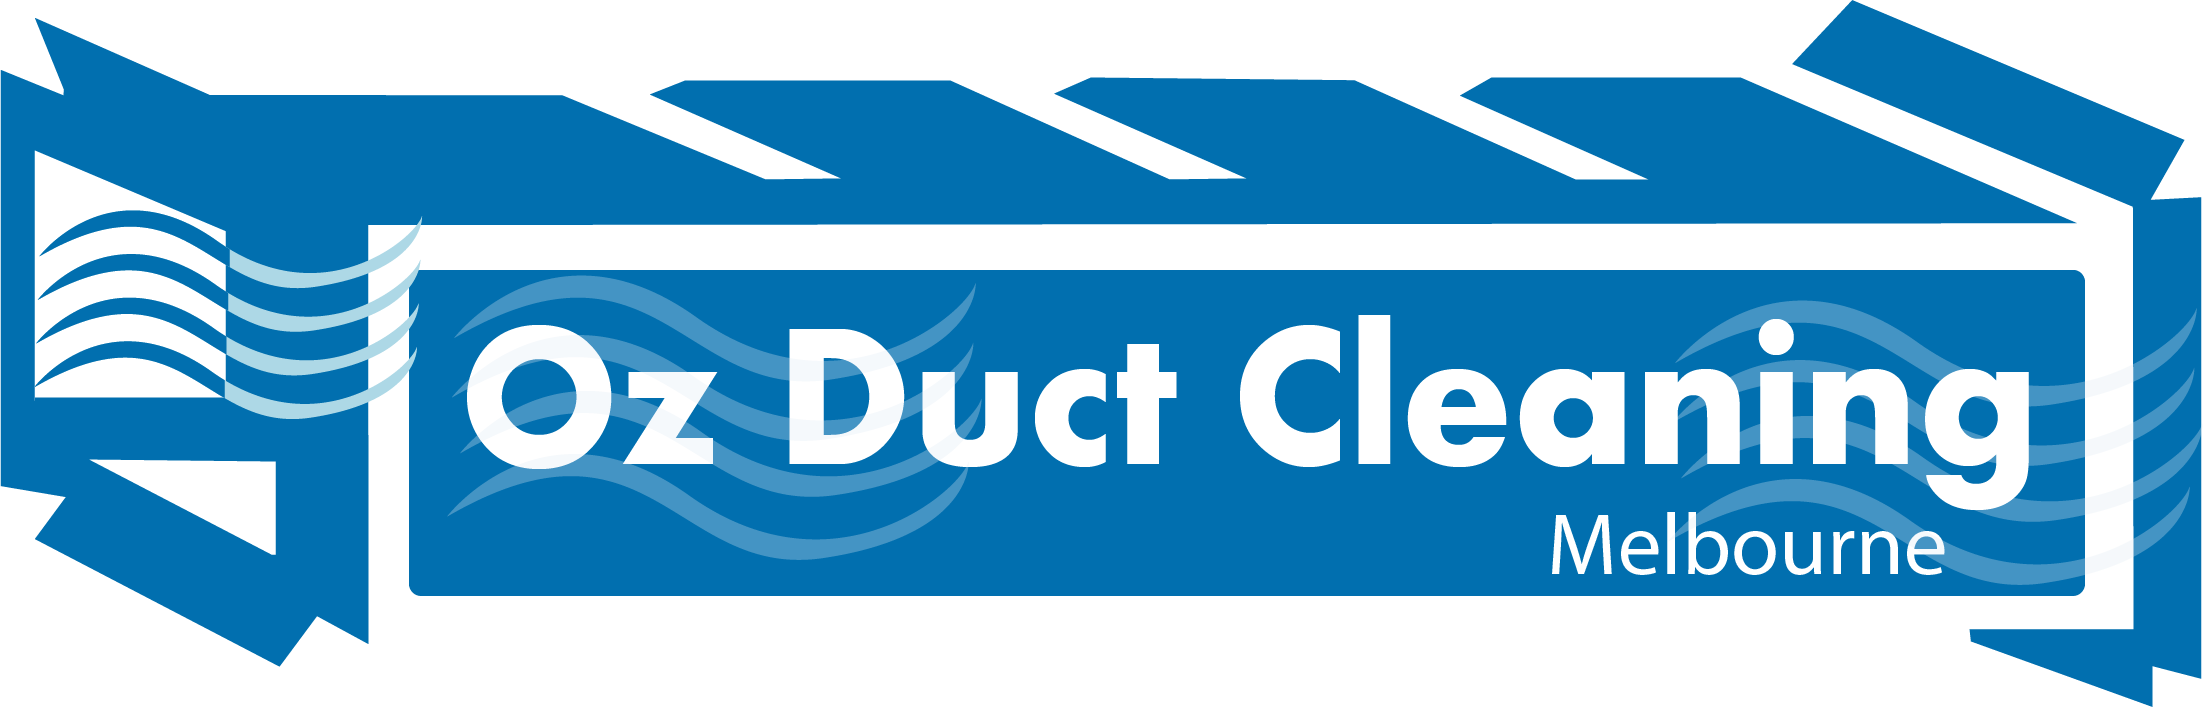 OZ Duct Cleaning Melbourne Company